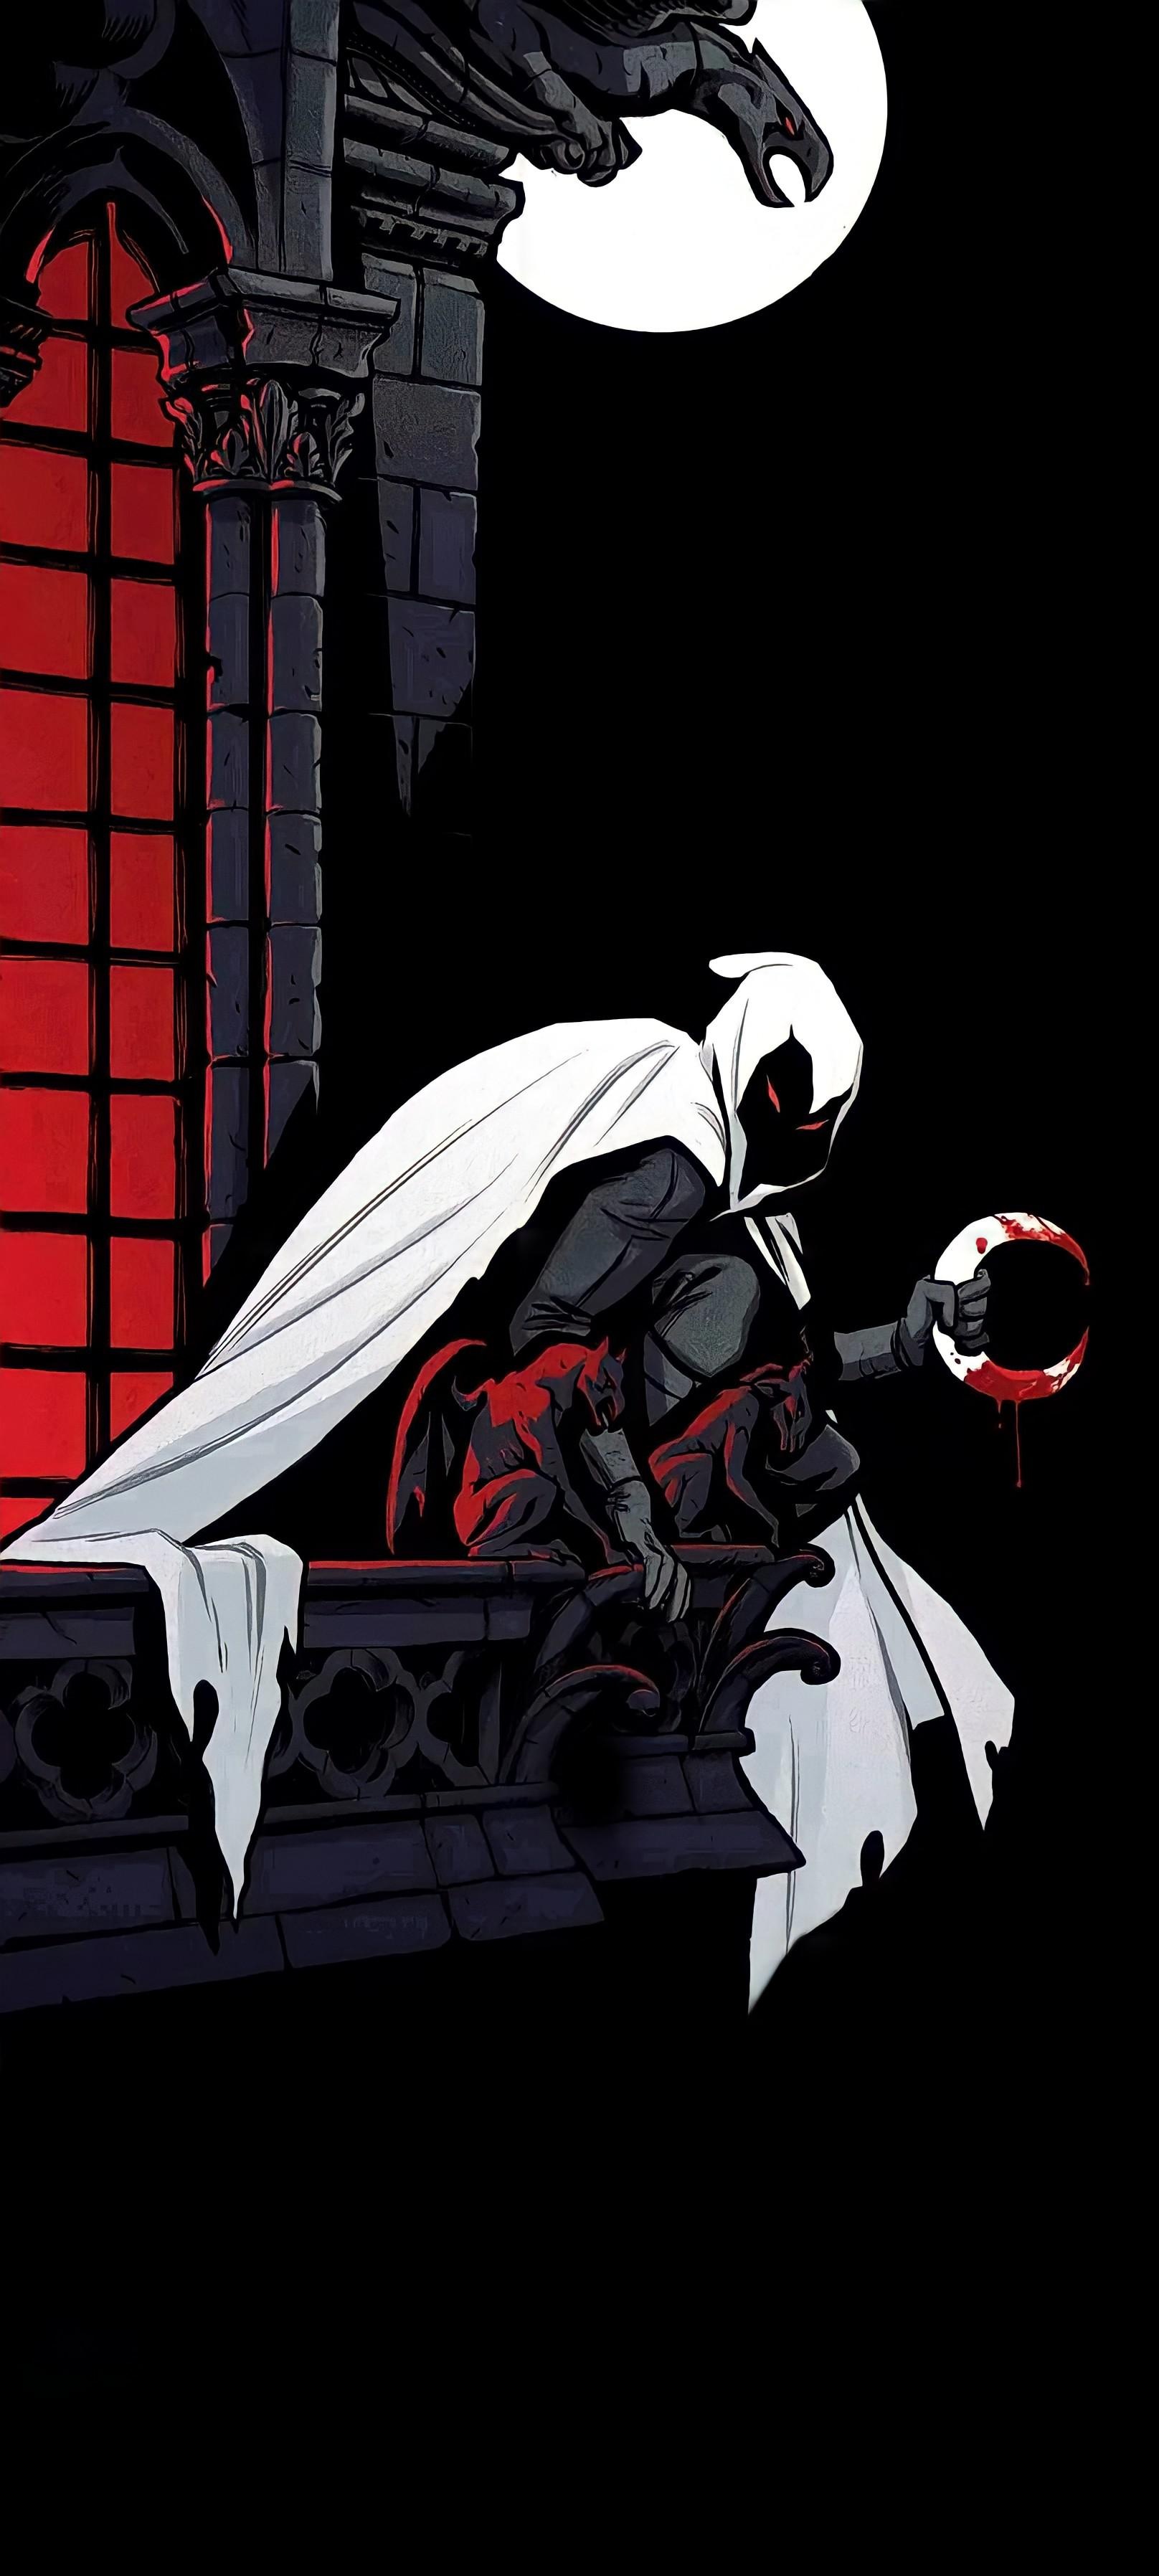 Moon Knight (TV Mini Series): The character created by writer Doug Moench and artist Don Perlin. 1620x3600 HD Background.